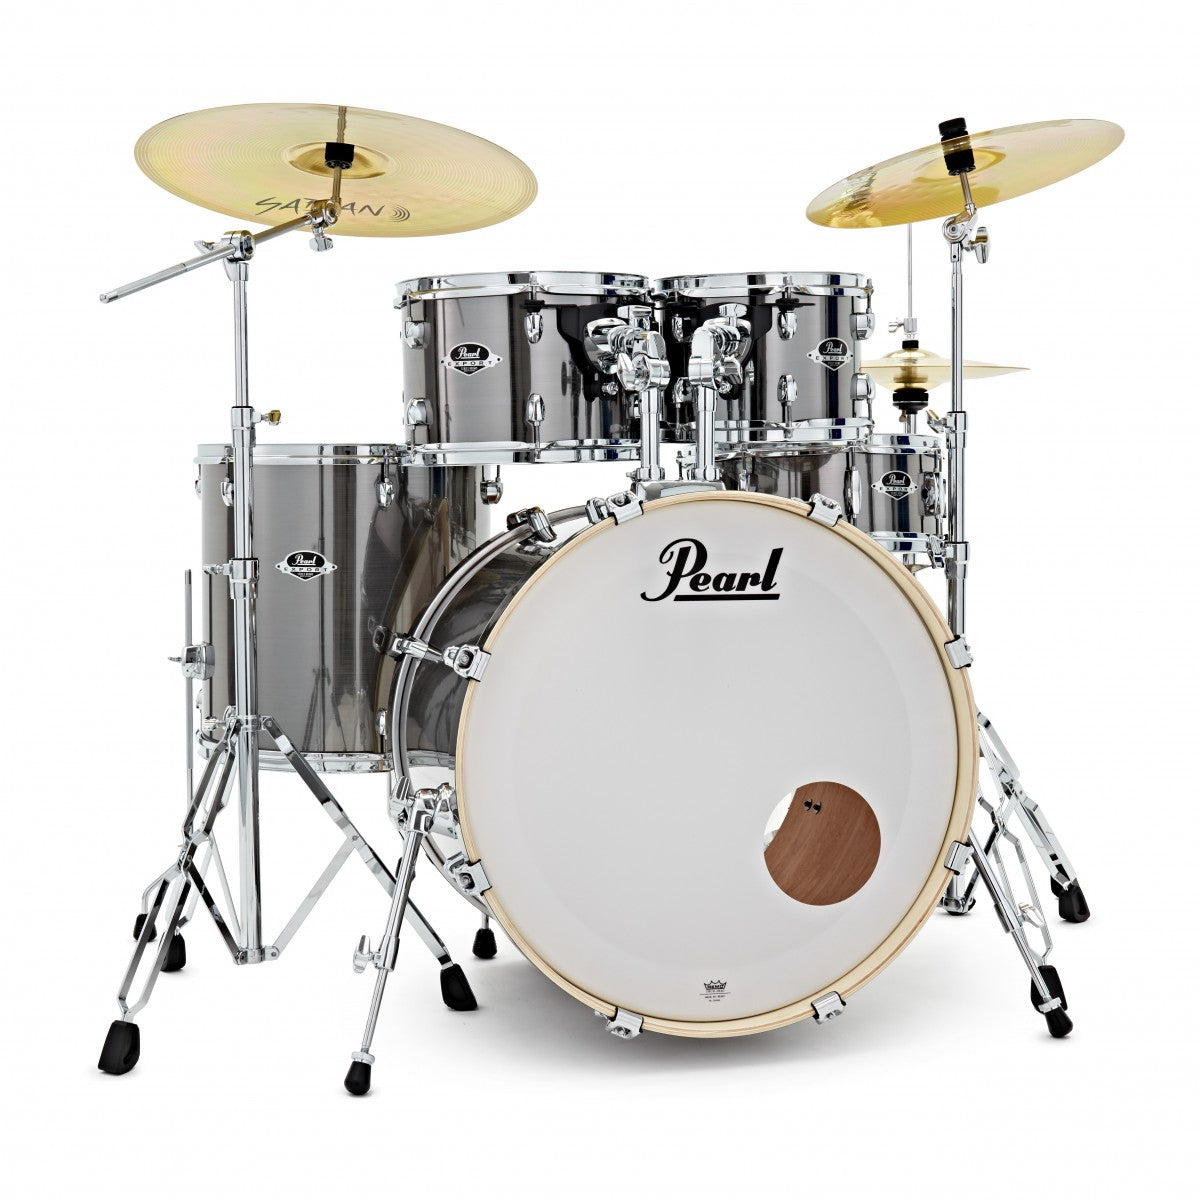 Trống Pearl Export 725 Fusion - EXX725FP/C760 - Việt Music